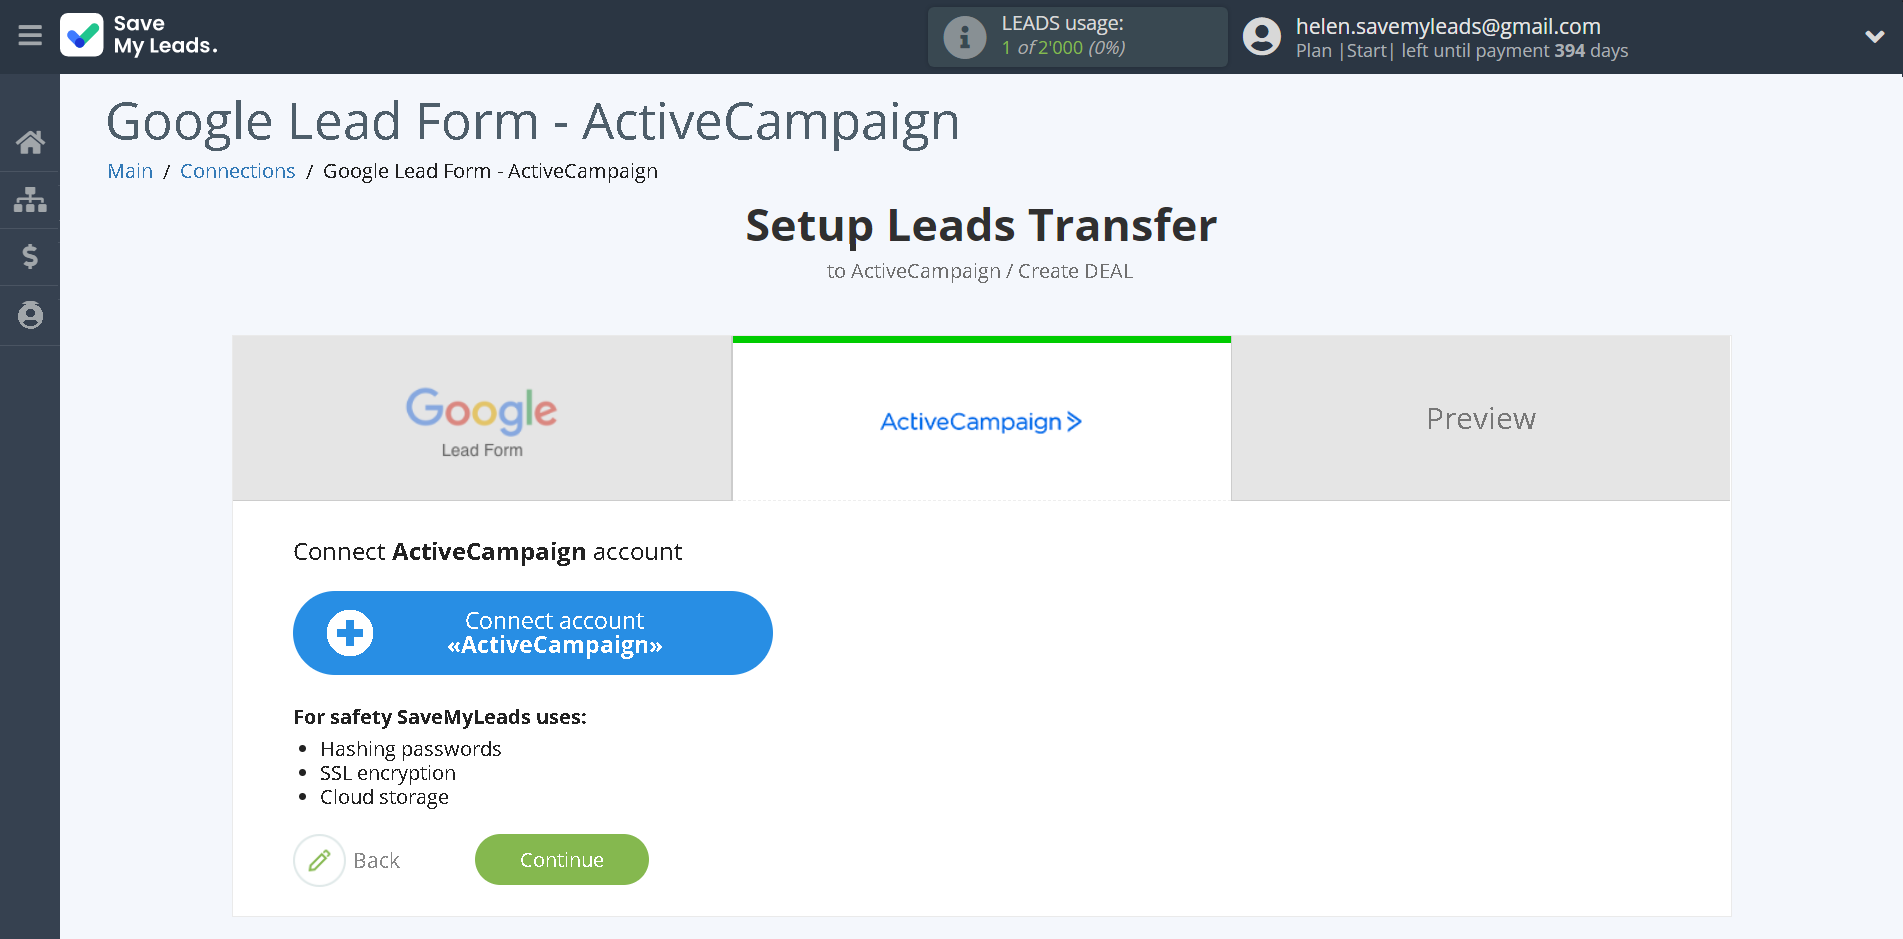 How to Connect Google Lead Form with ActiveCampaign Create Deal | Data Destination account connection